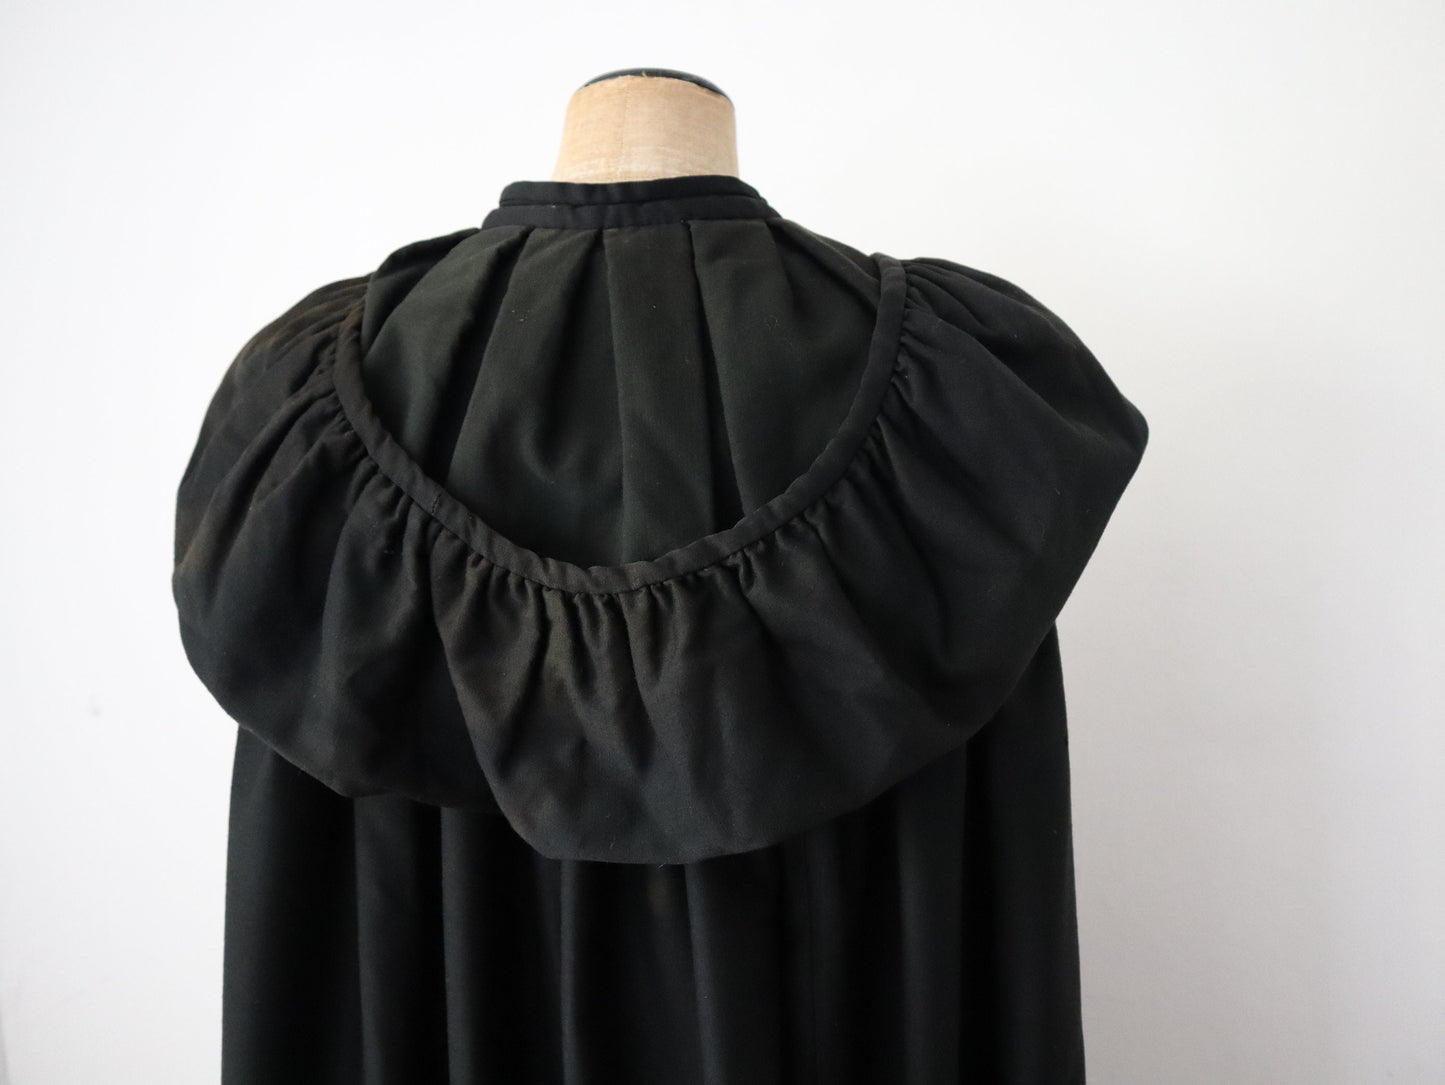 Antique 19th century French Hooded Cape Provençal Traditional Clothing